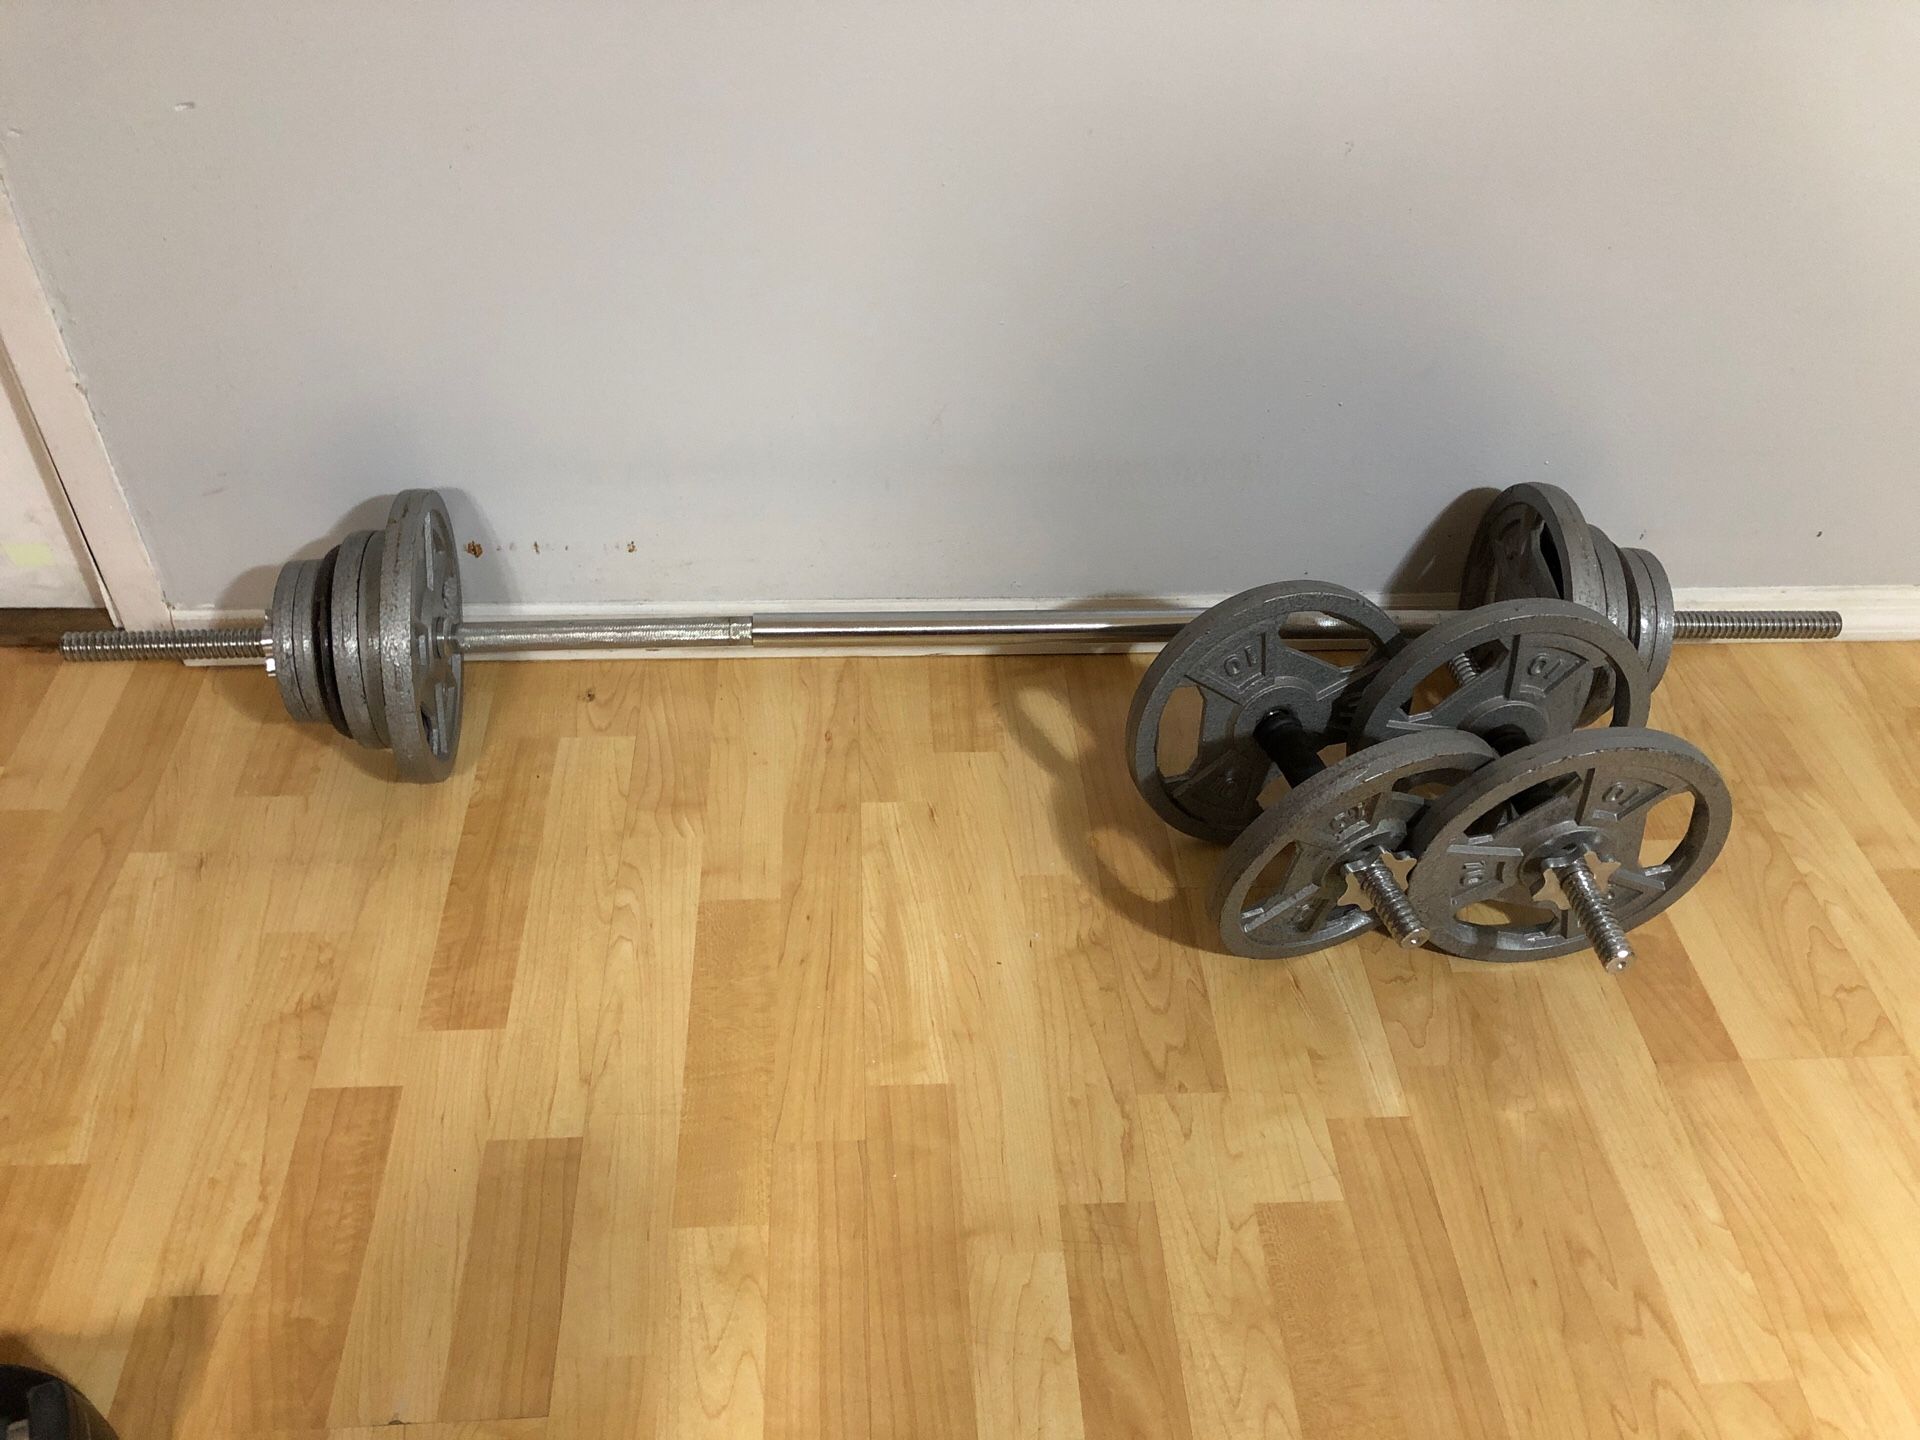 Barbell and dumbbell set - 93 LBS